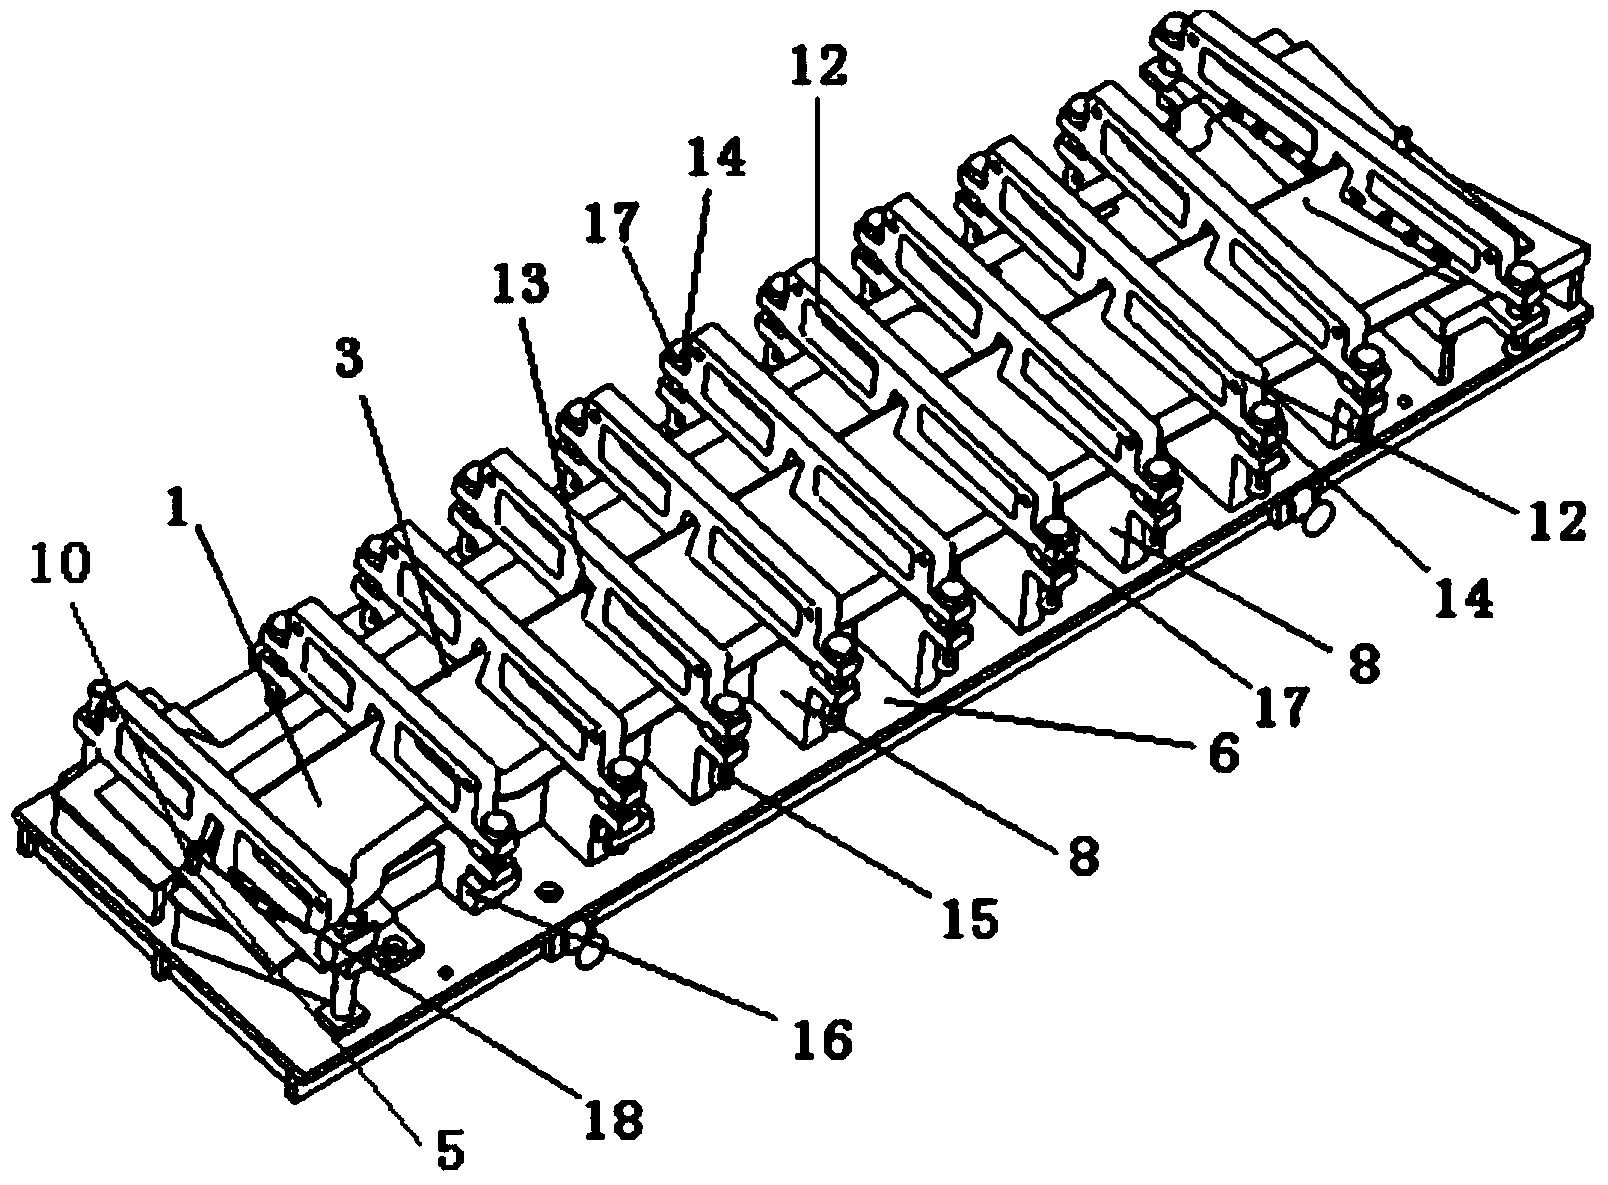 Deformation control method for heat treatment of airplane upper edge strip component